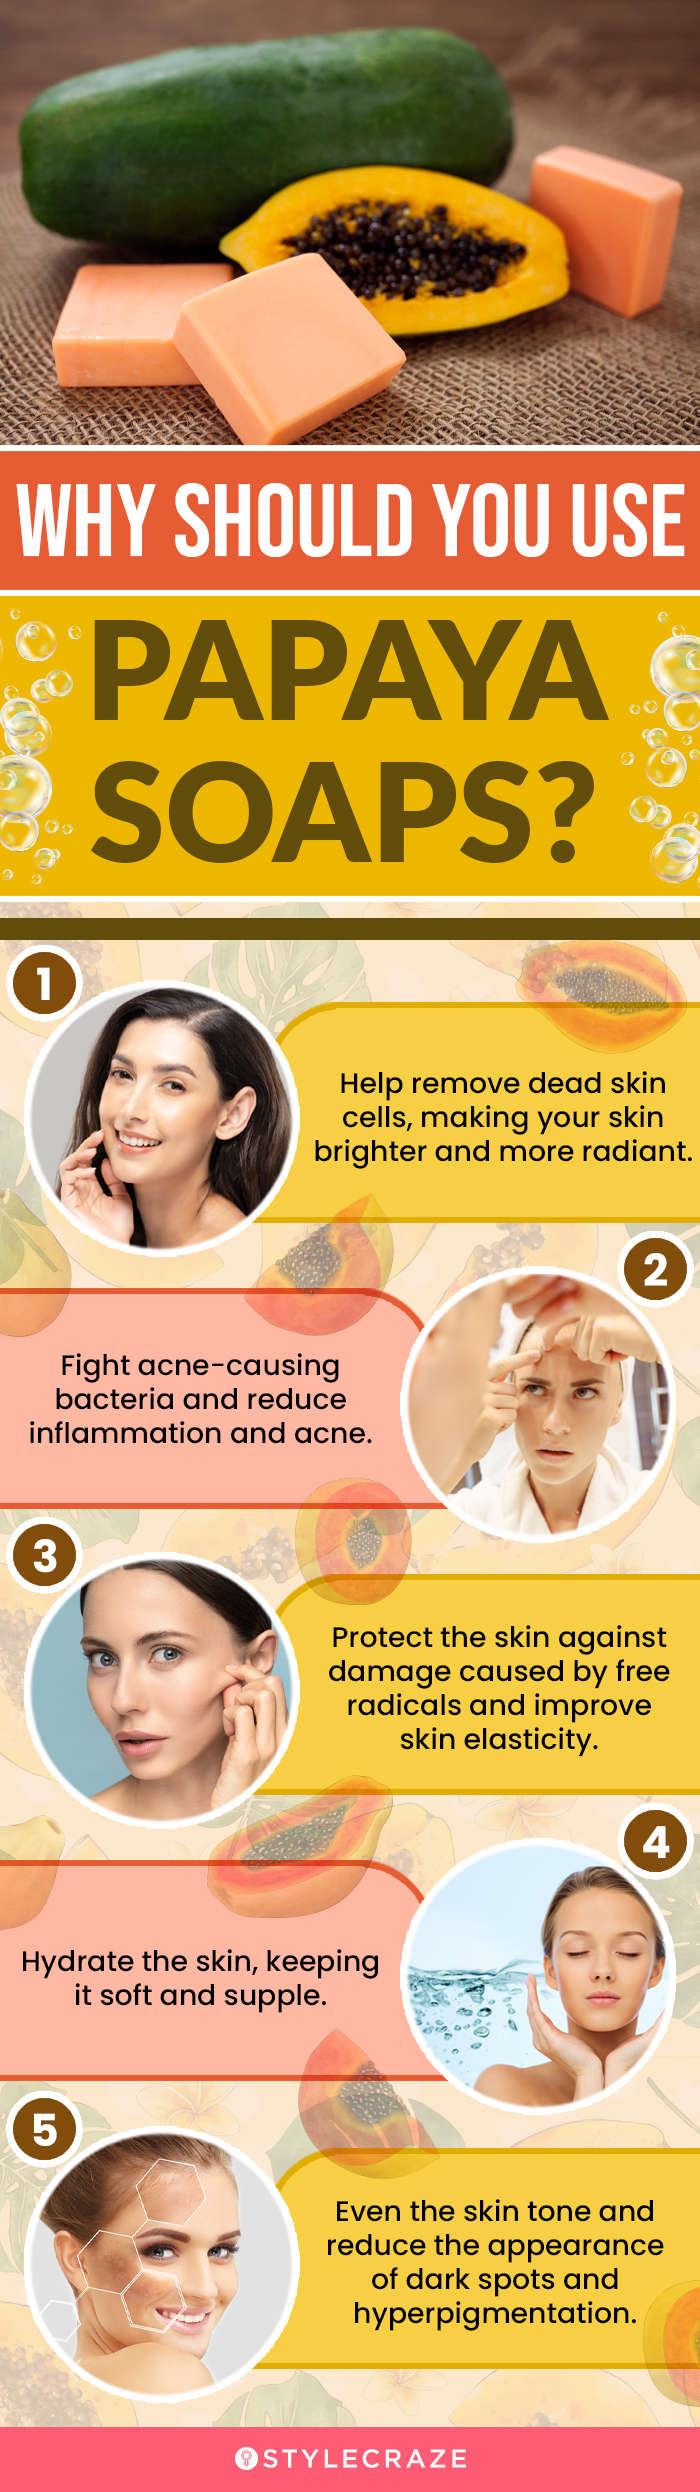 Why Should You Use Papaya Soaps? (infographic)